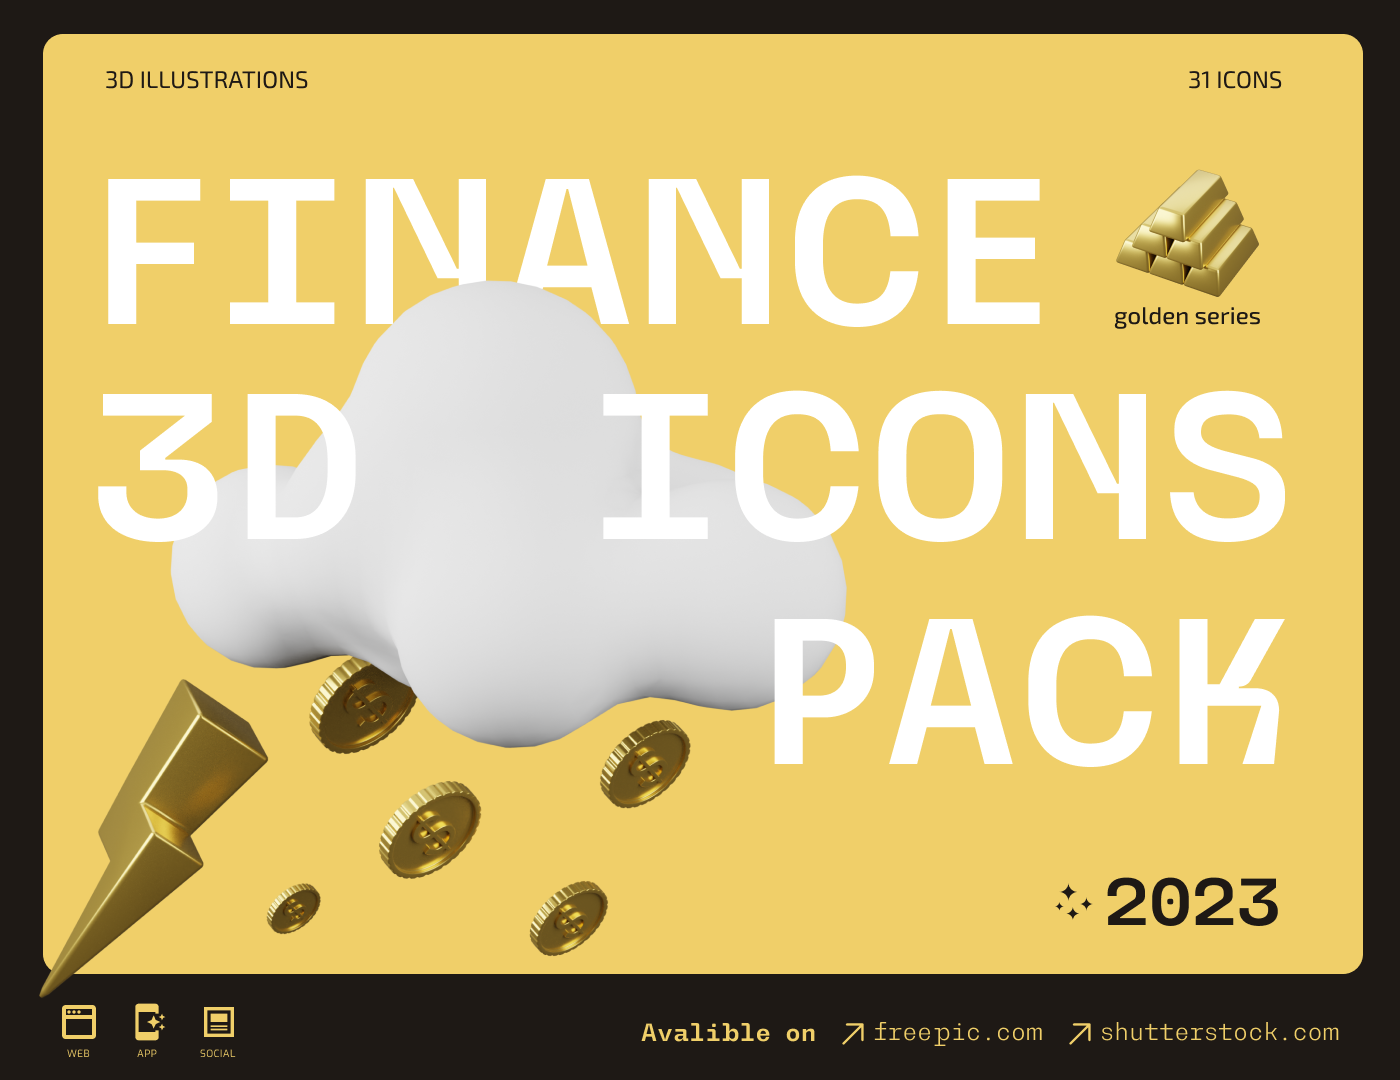 3d icon 3D 3d icons 3d icons pack blender Cycles render finance gold icon design  metallic